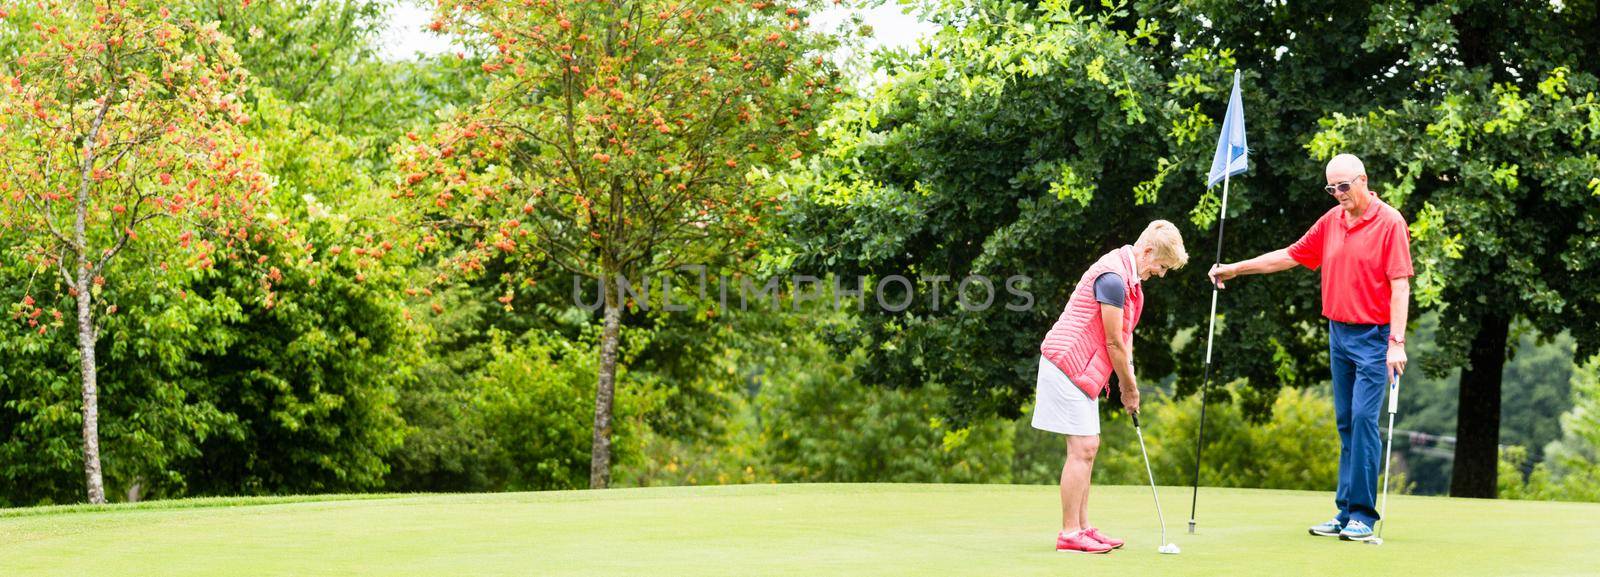 Senior woman and man playing golf putting on green by Kzenon